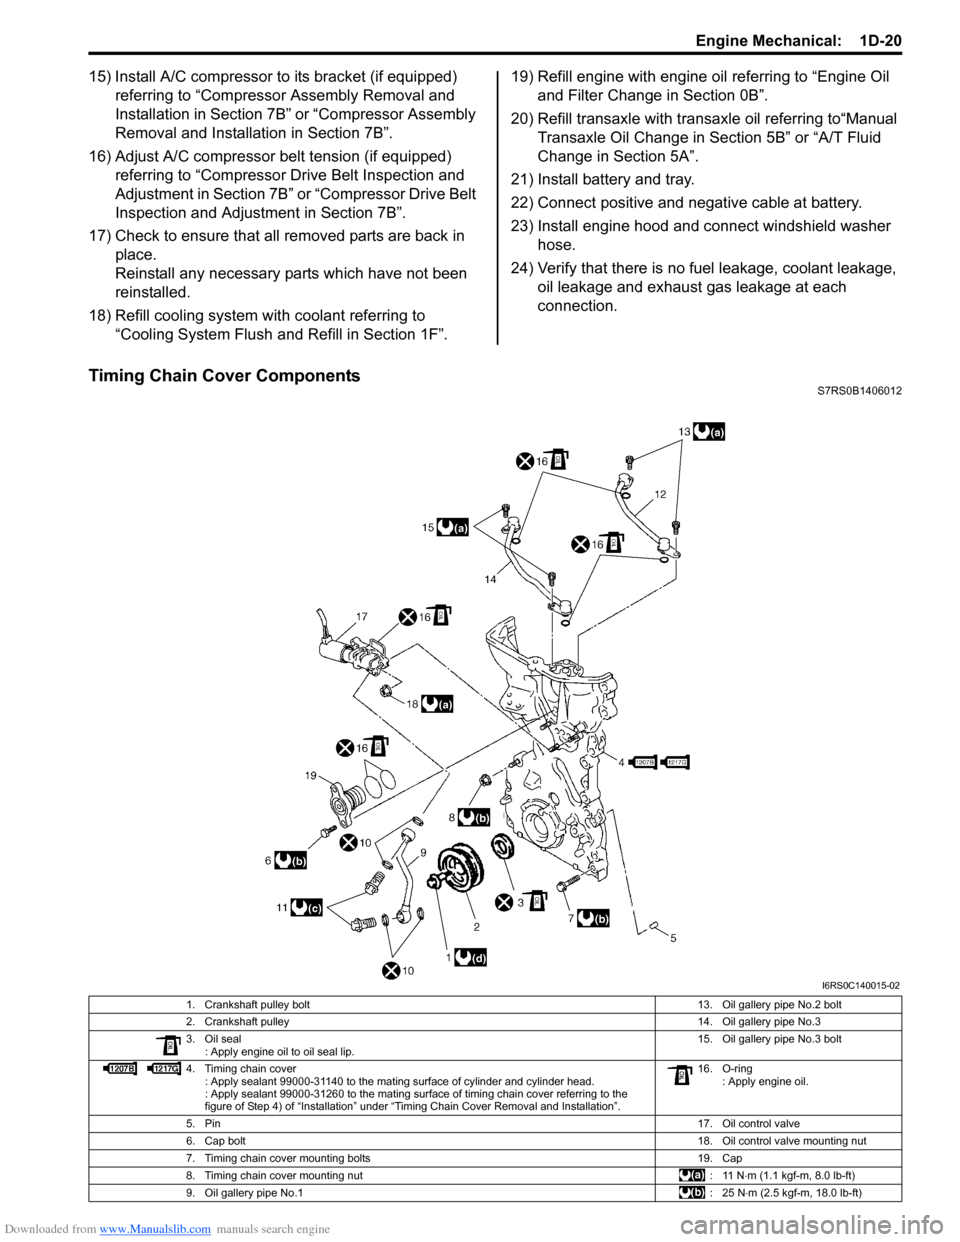 SUZUKI SWIFT 2004 2.G Service Workshop Manual Downloaded from www.Manualslib.com manuals search engine Engine Mechanical:  1D-20
15) Install A/C compressor to its bracket (if equipped) referring to “Compressor Assembly Removal and 
Installation